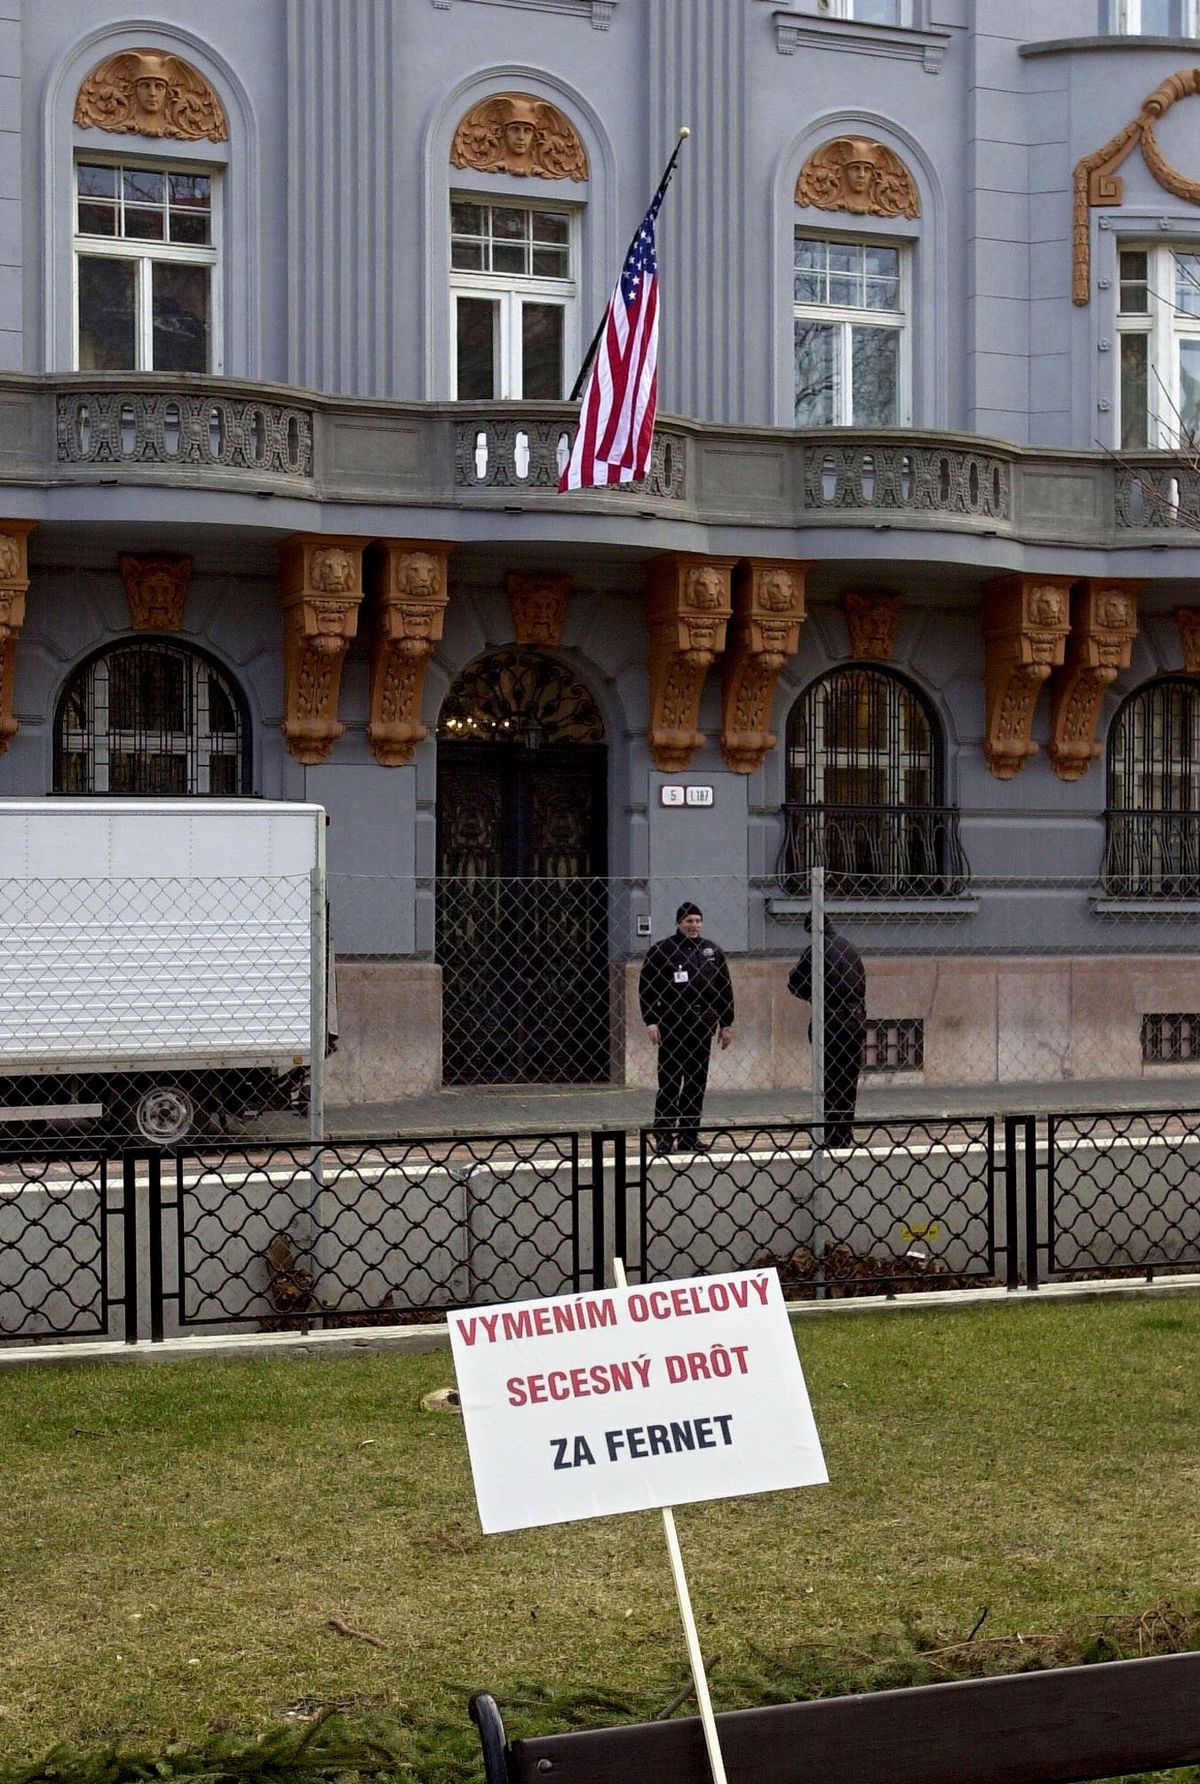 Mayor Stevcik Orders Fence around US Embassy to Be Removed